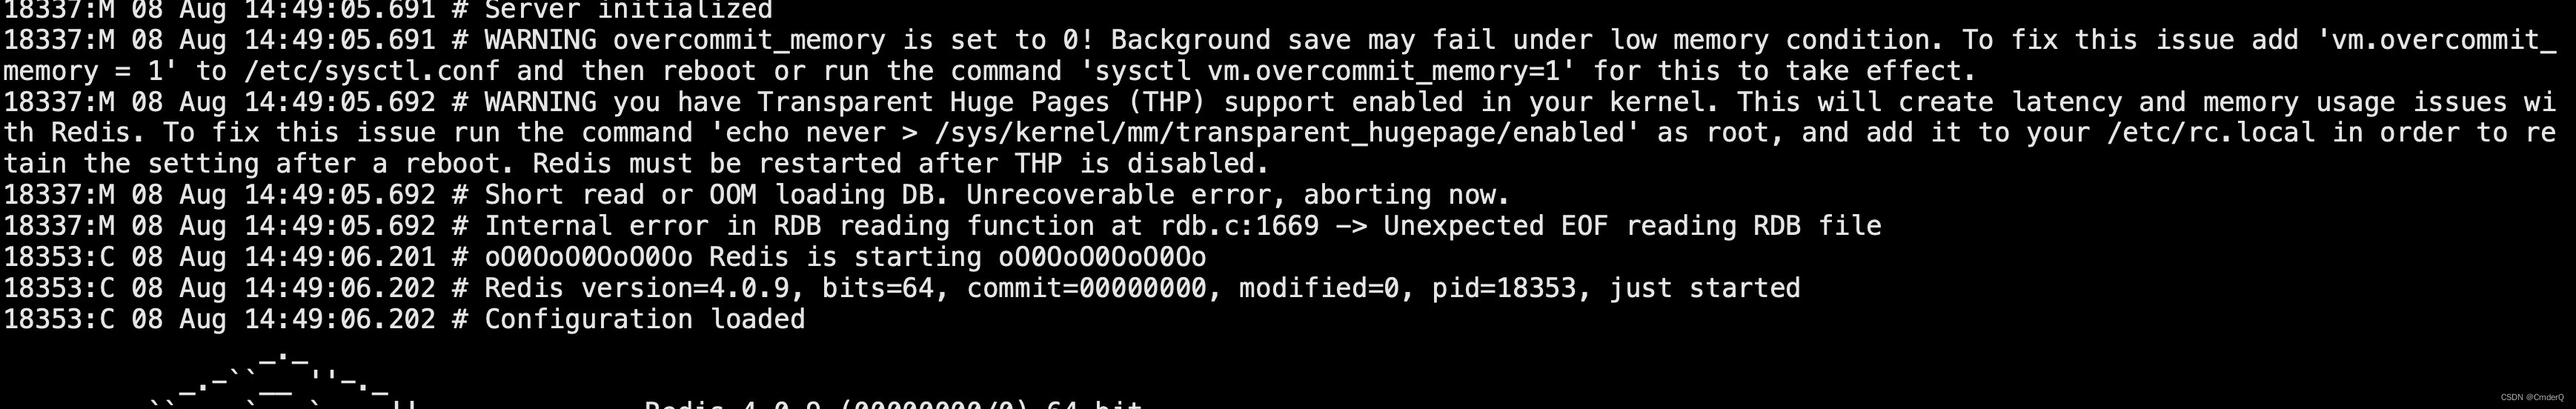 Short read or OOM loading DB. Unrecoverable error, aborting now